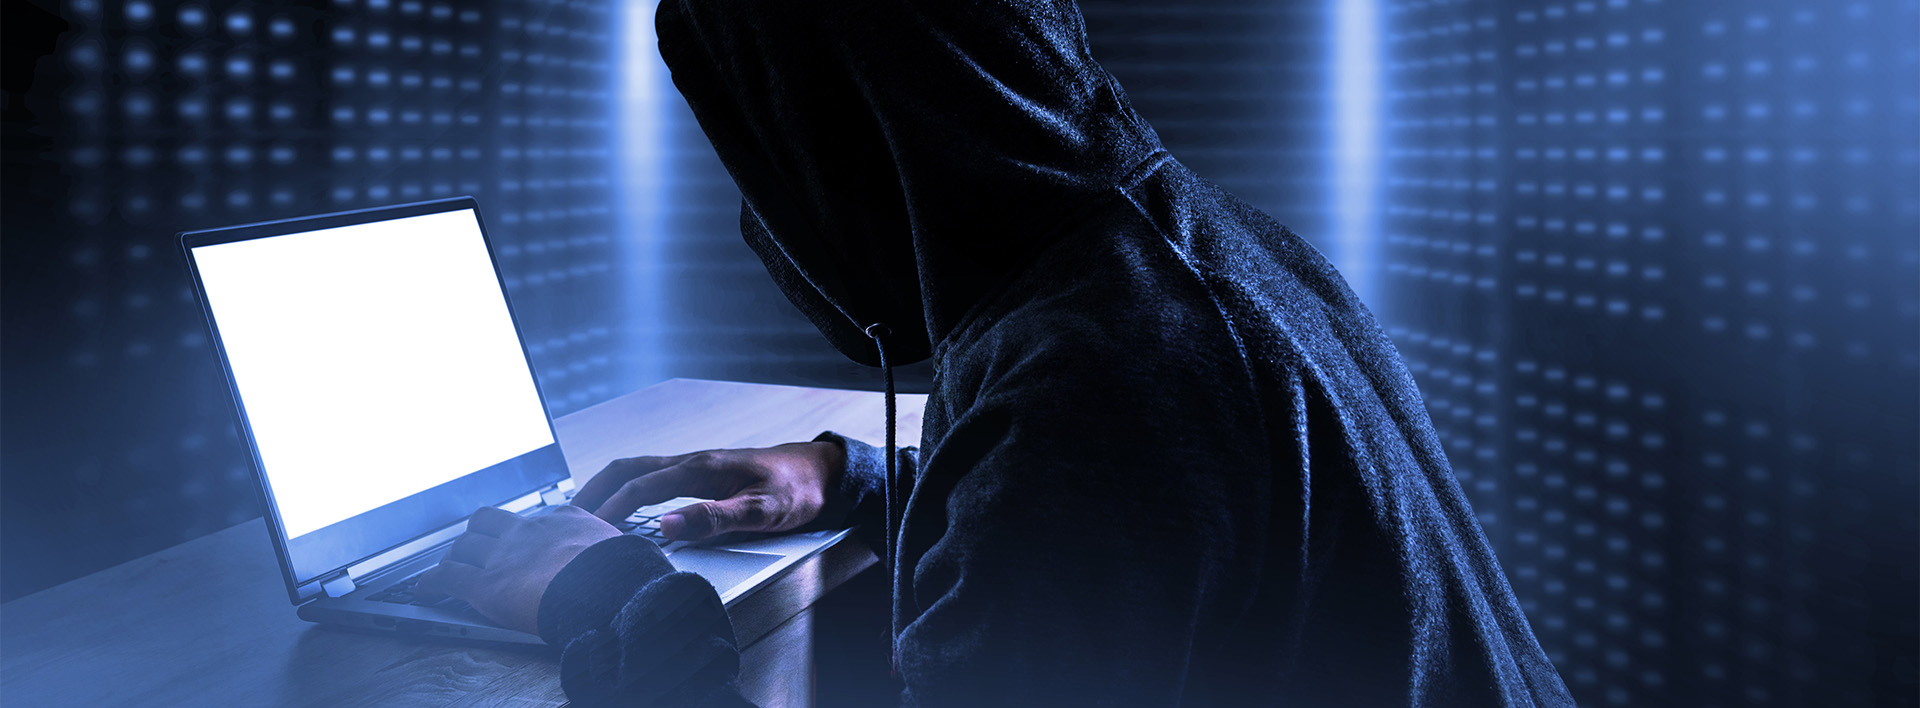 Cybercrime hacking and technology crime hacker with laptop